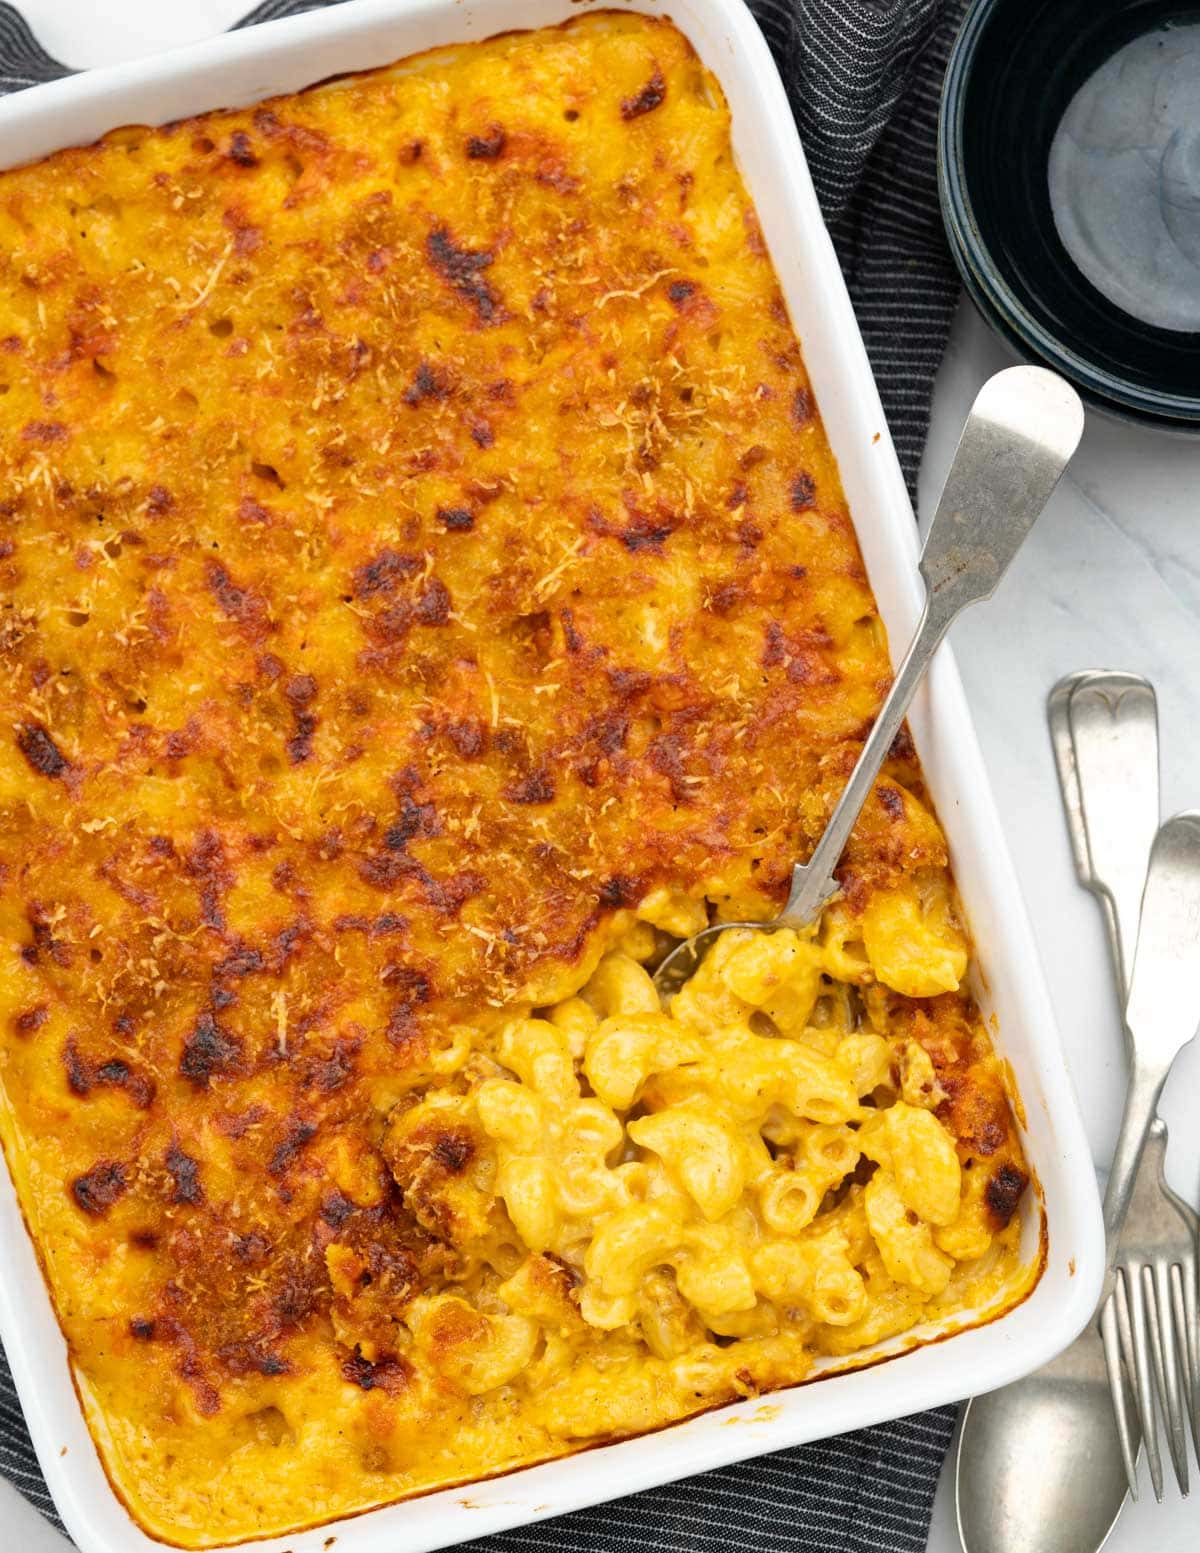 Top view of Cheesy Baked Mac and Cheese topped with breadcrumb topping, in a casserole dish